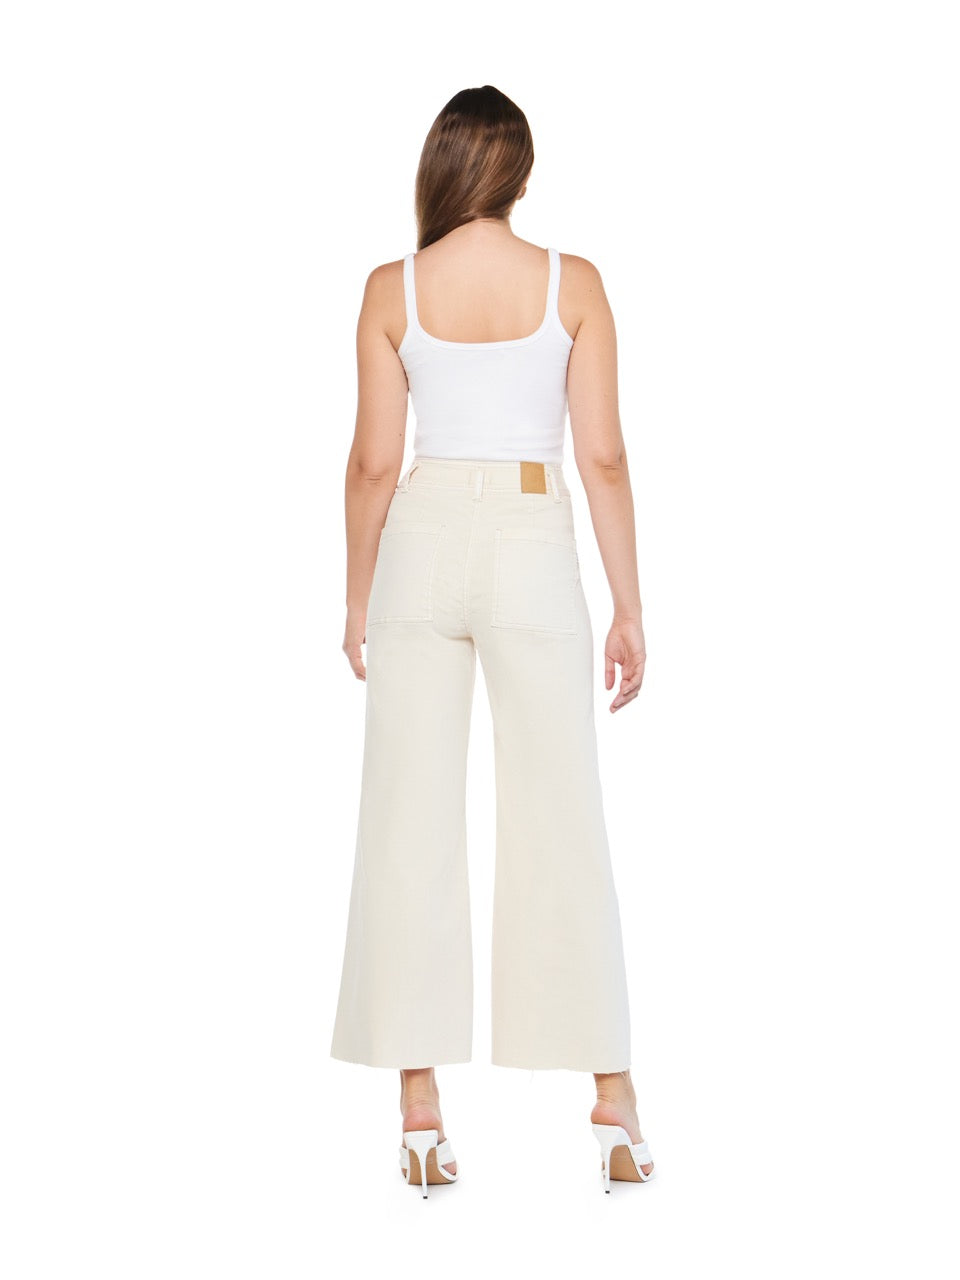 articles of society carine high rise raw wide leg jeans in stone-back view